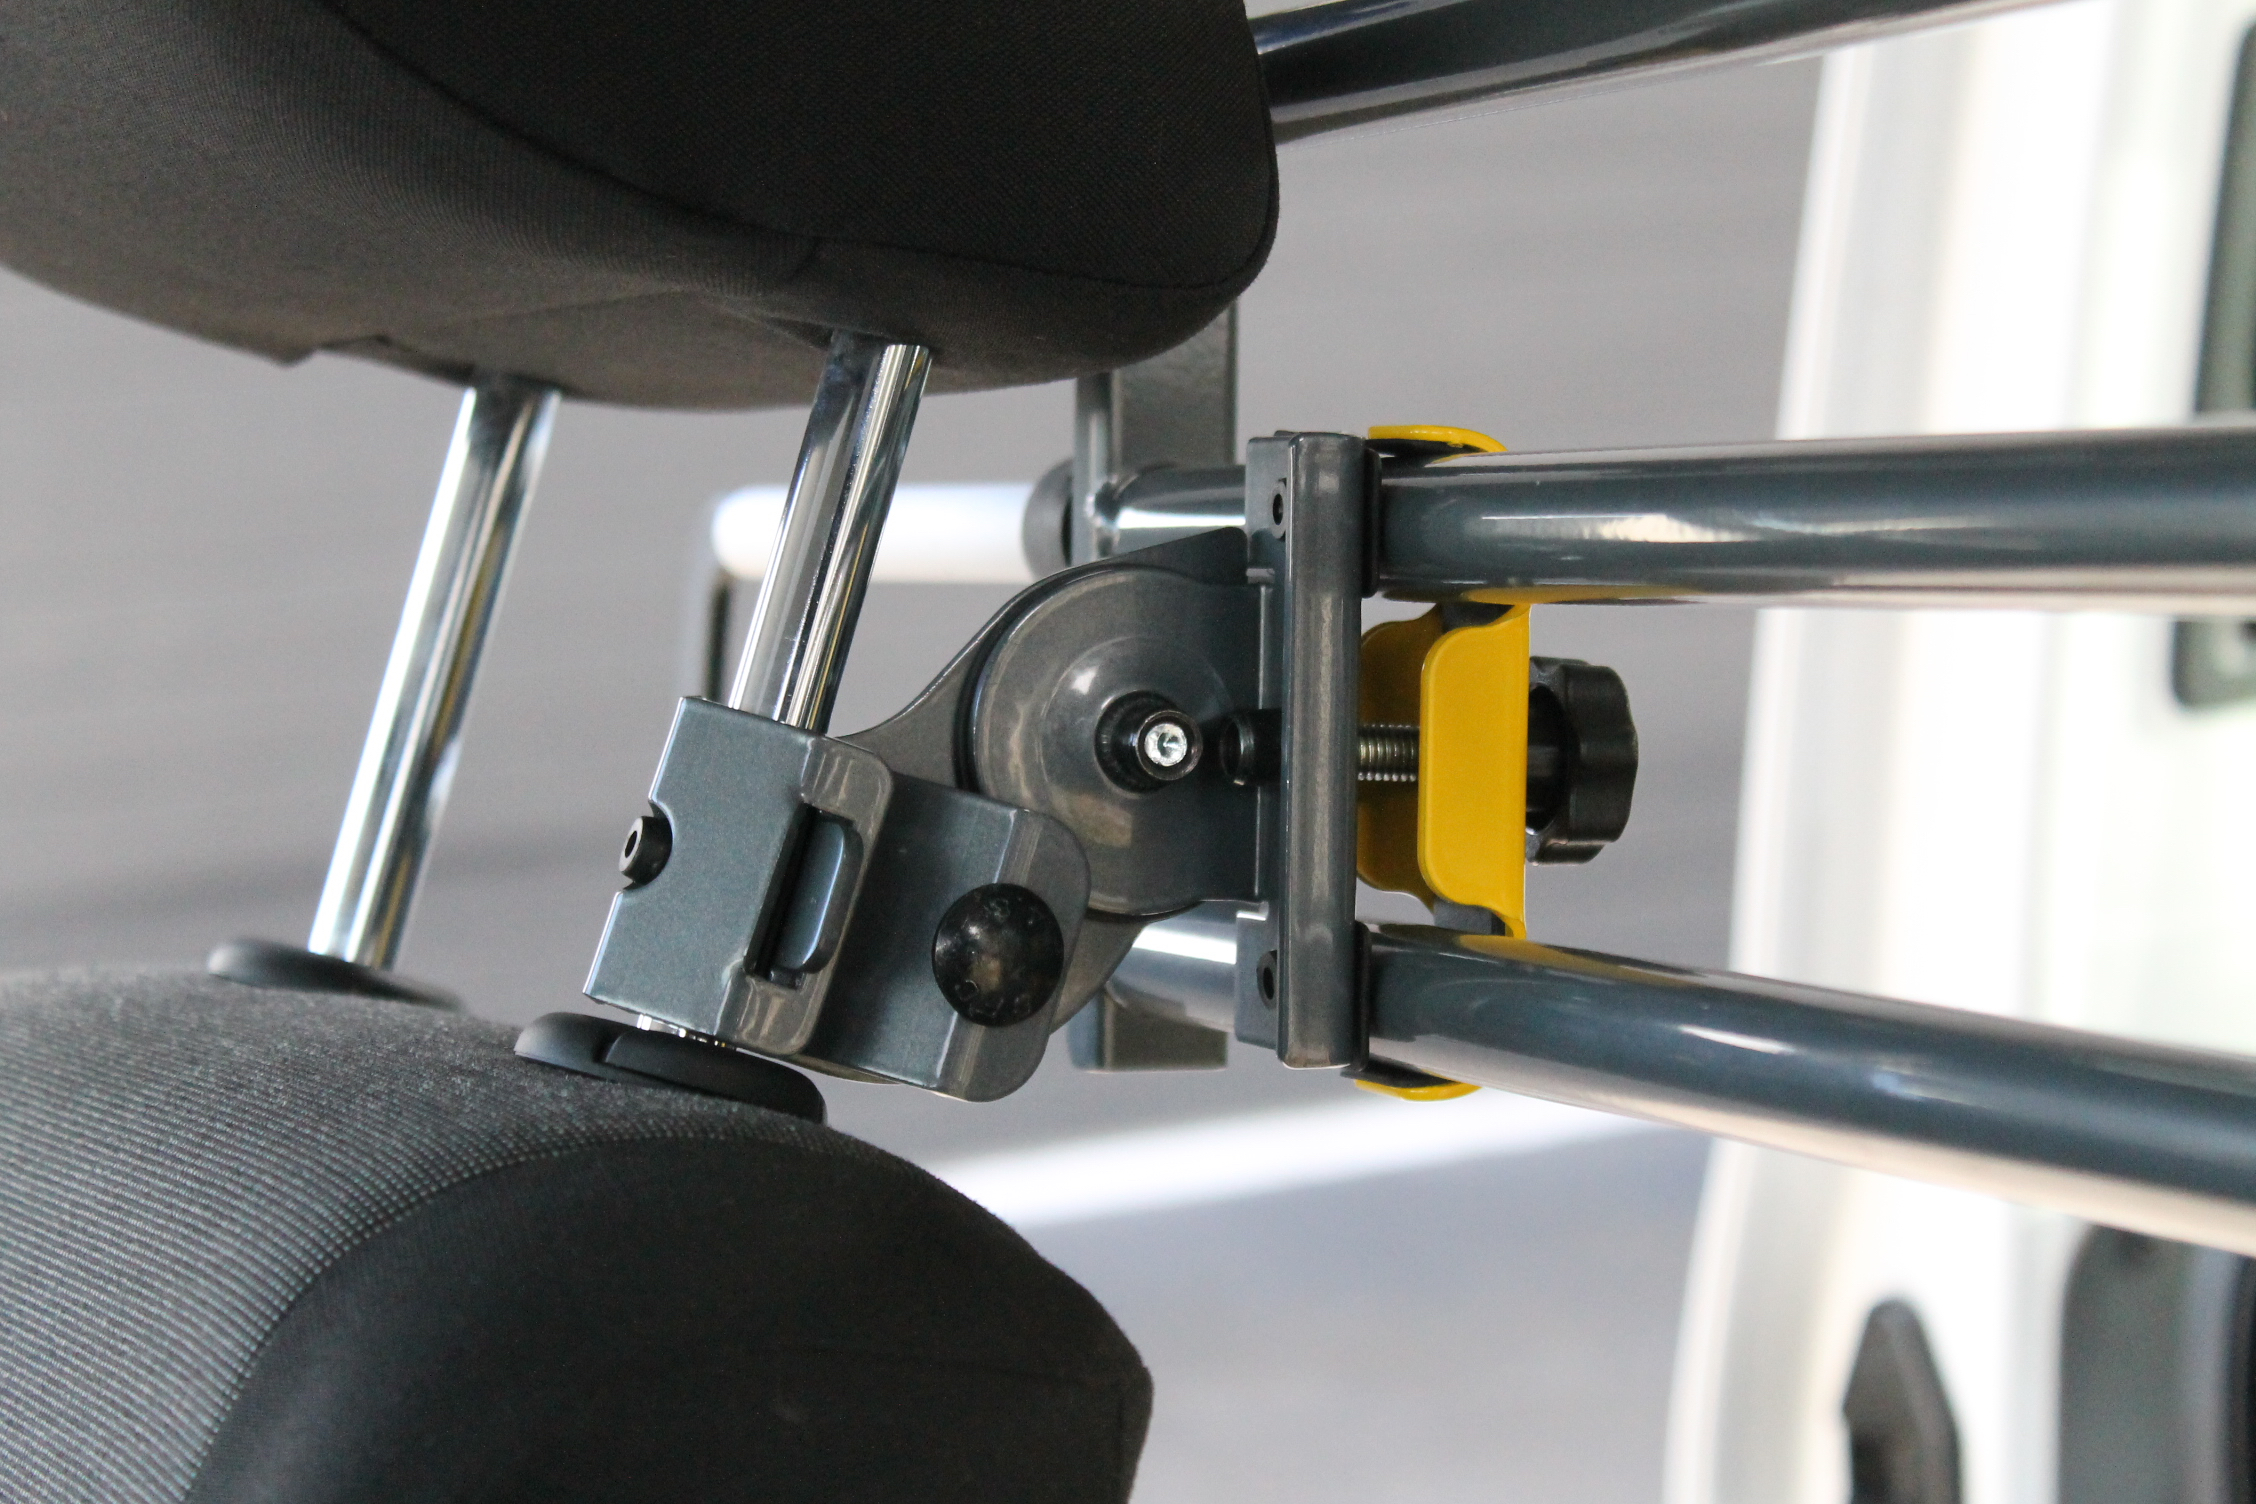 The Variobarrier HR fitted to the headrest pole